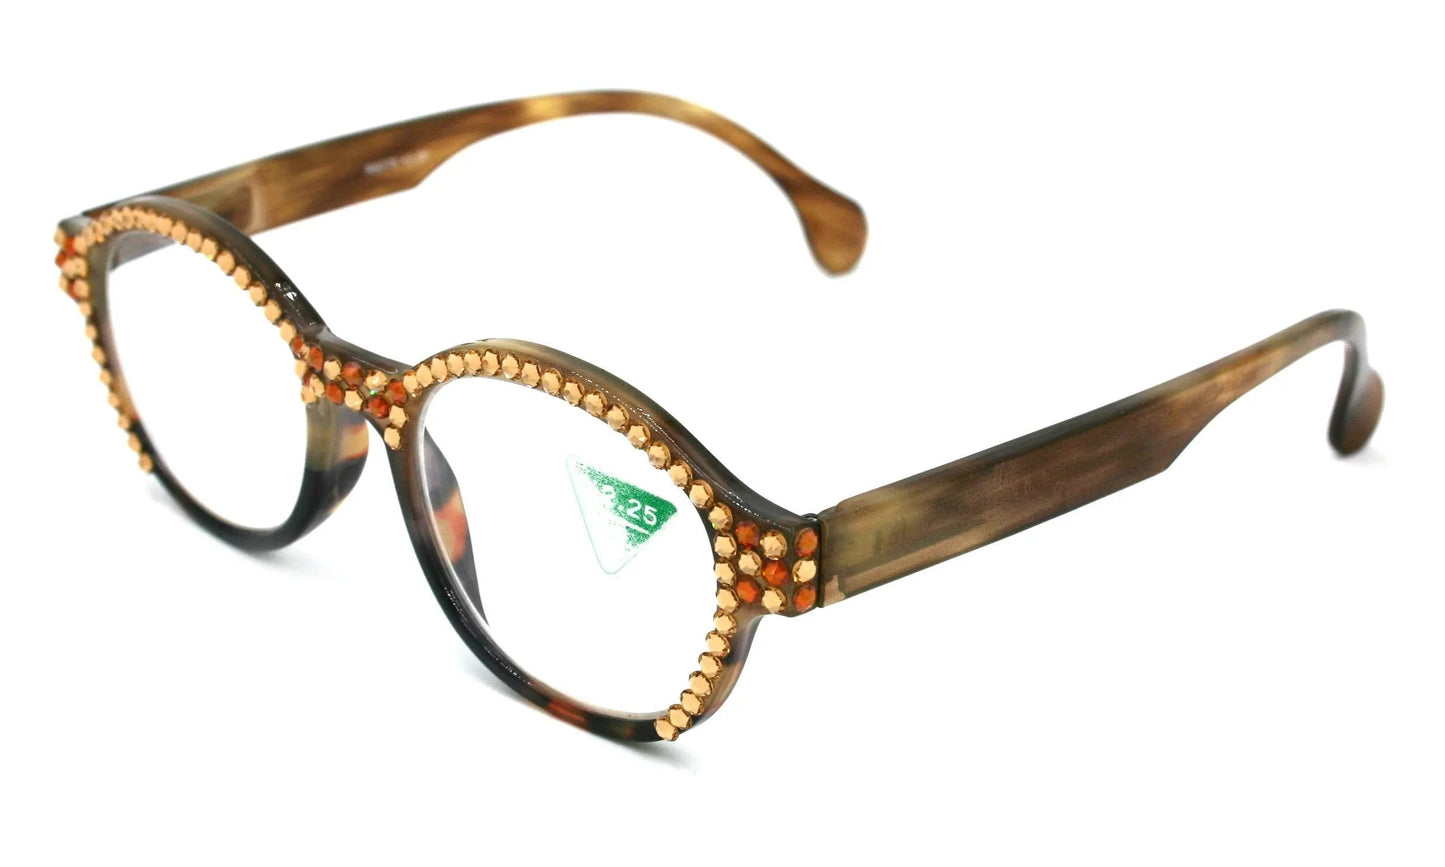 The Alchemist, (Bling) Round Women Reading Glasses W (L. Colorado, Cooper) Genuine European Crystals (Marble Brown) NY Fifth Avenue 